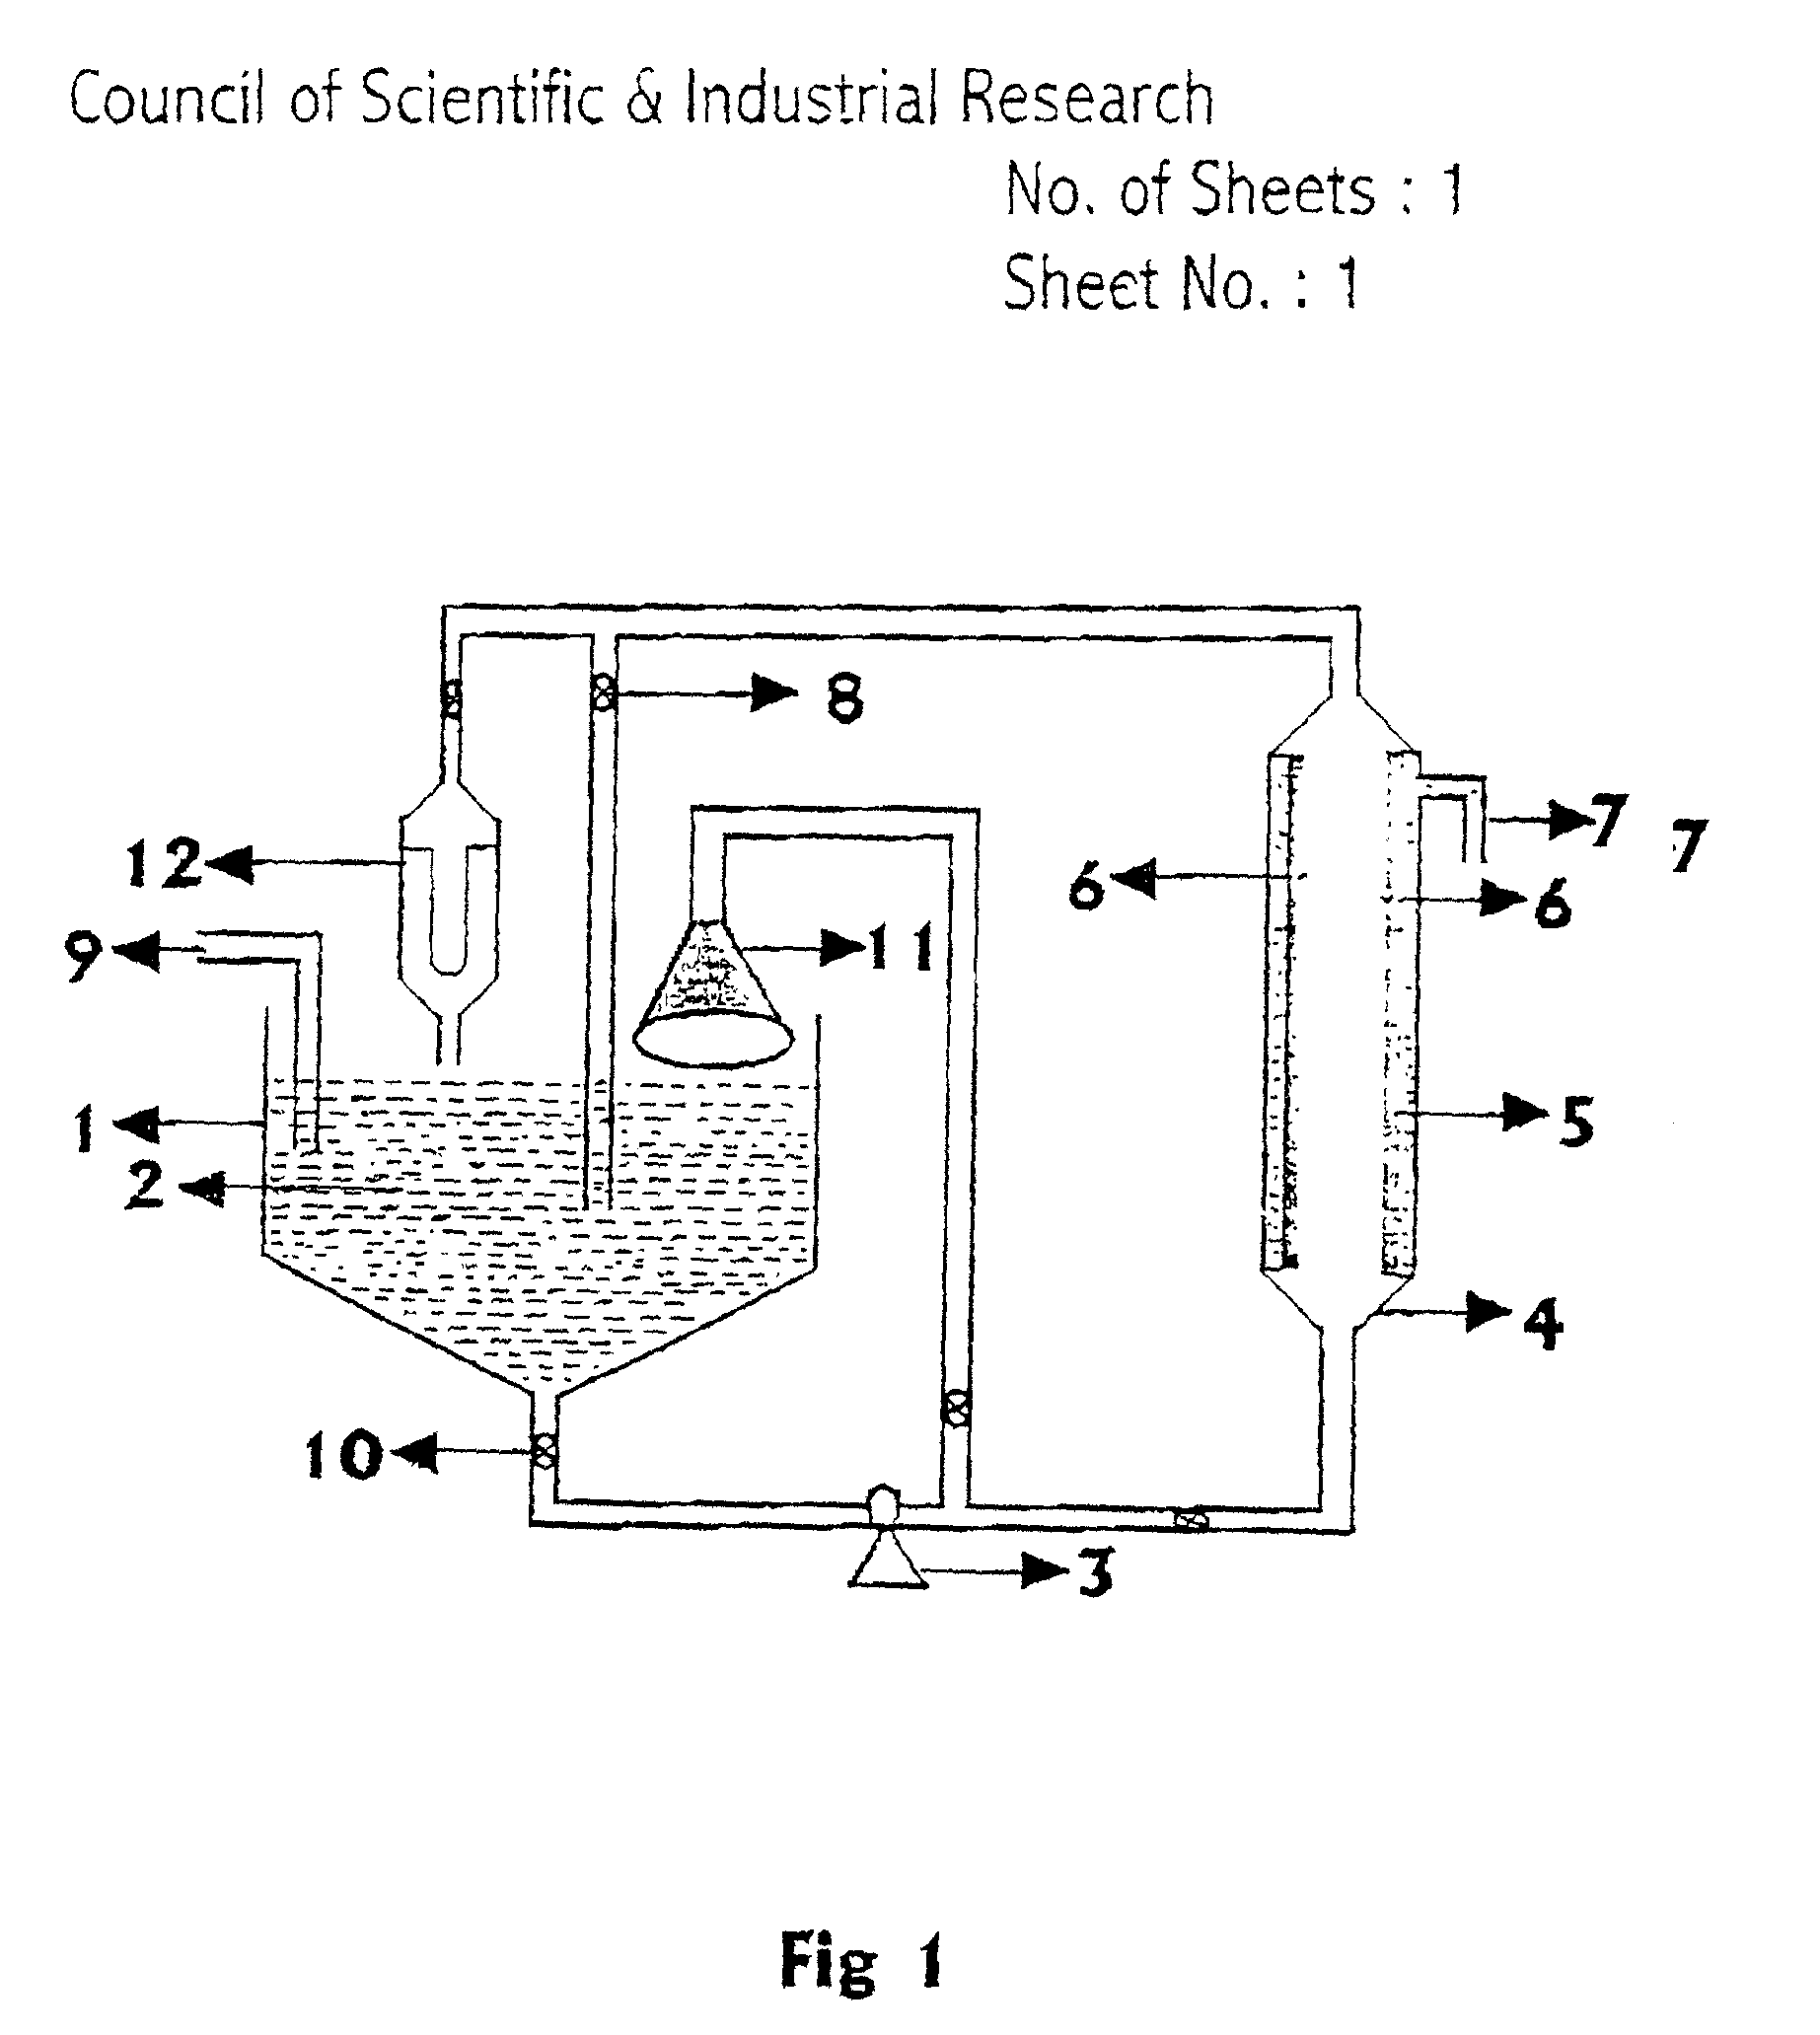 Process for the preparation of arsenic free water, apparatus therefor, method for the manufacture of porous ceramics for use in pressure filtration to produce arsenic free water